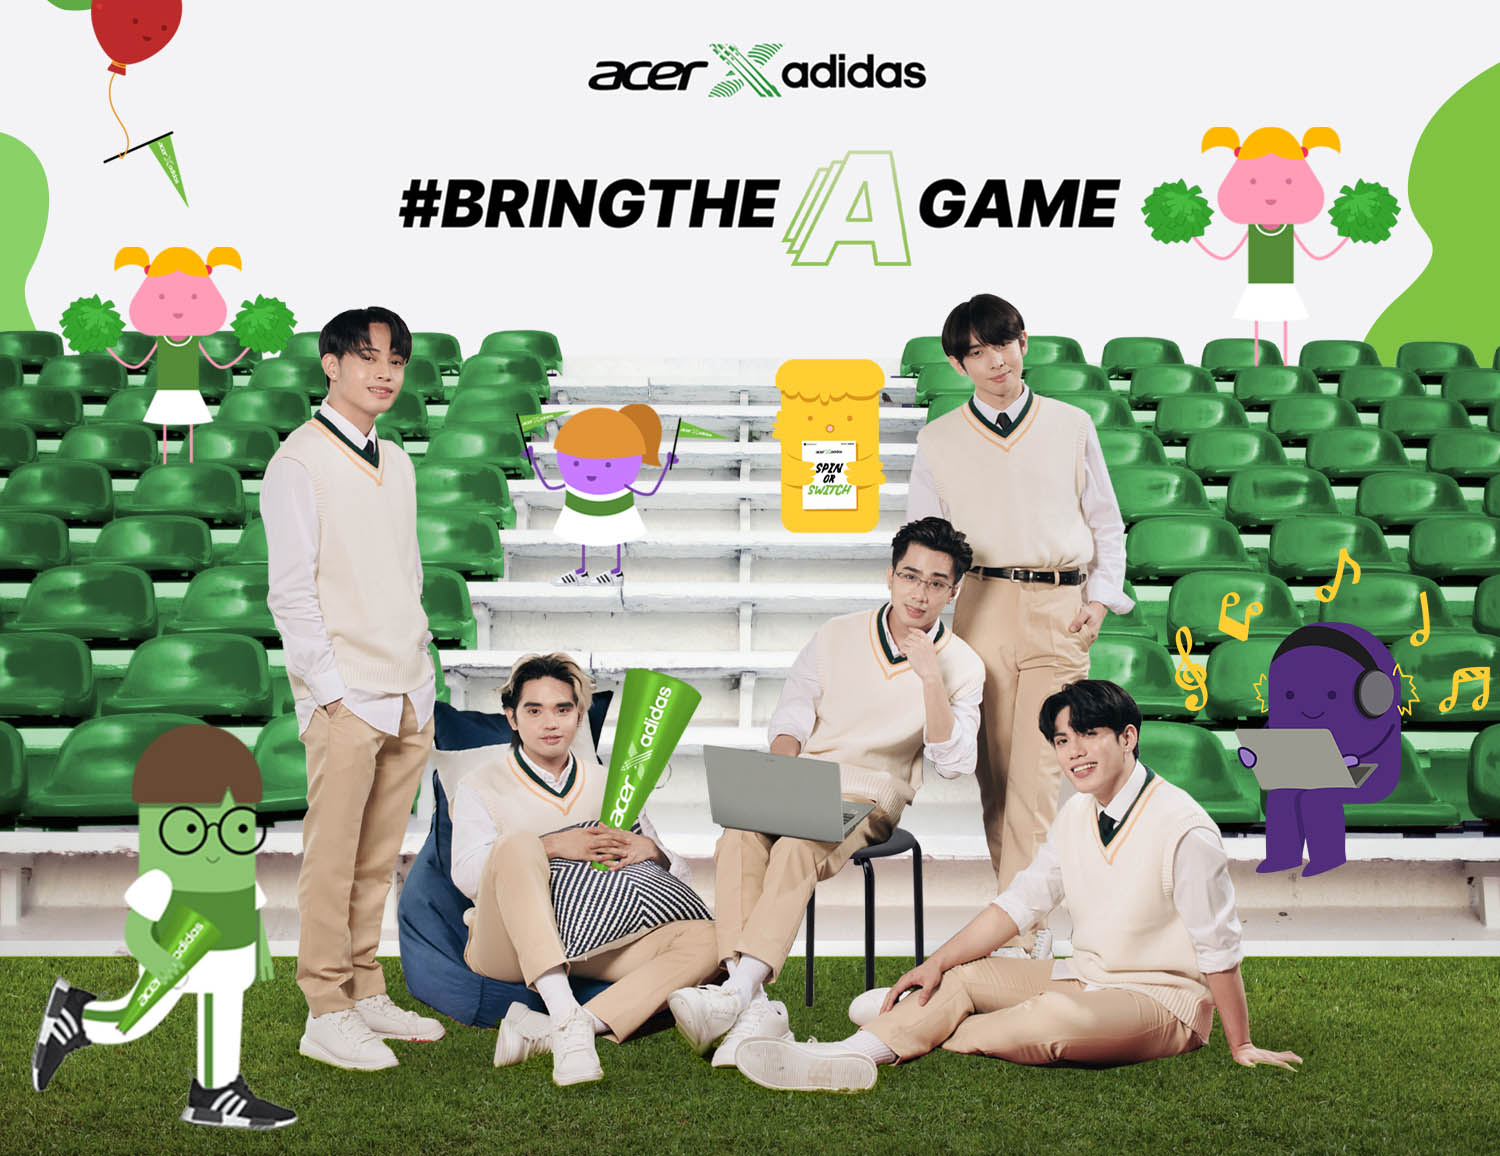 “Bring The A Game” with Acer’s back-to-school deals including discounts and Adidas vouchers redeemable from participating The SM Stores